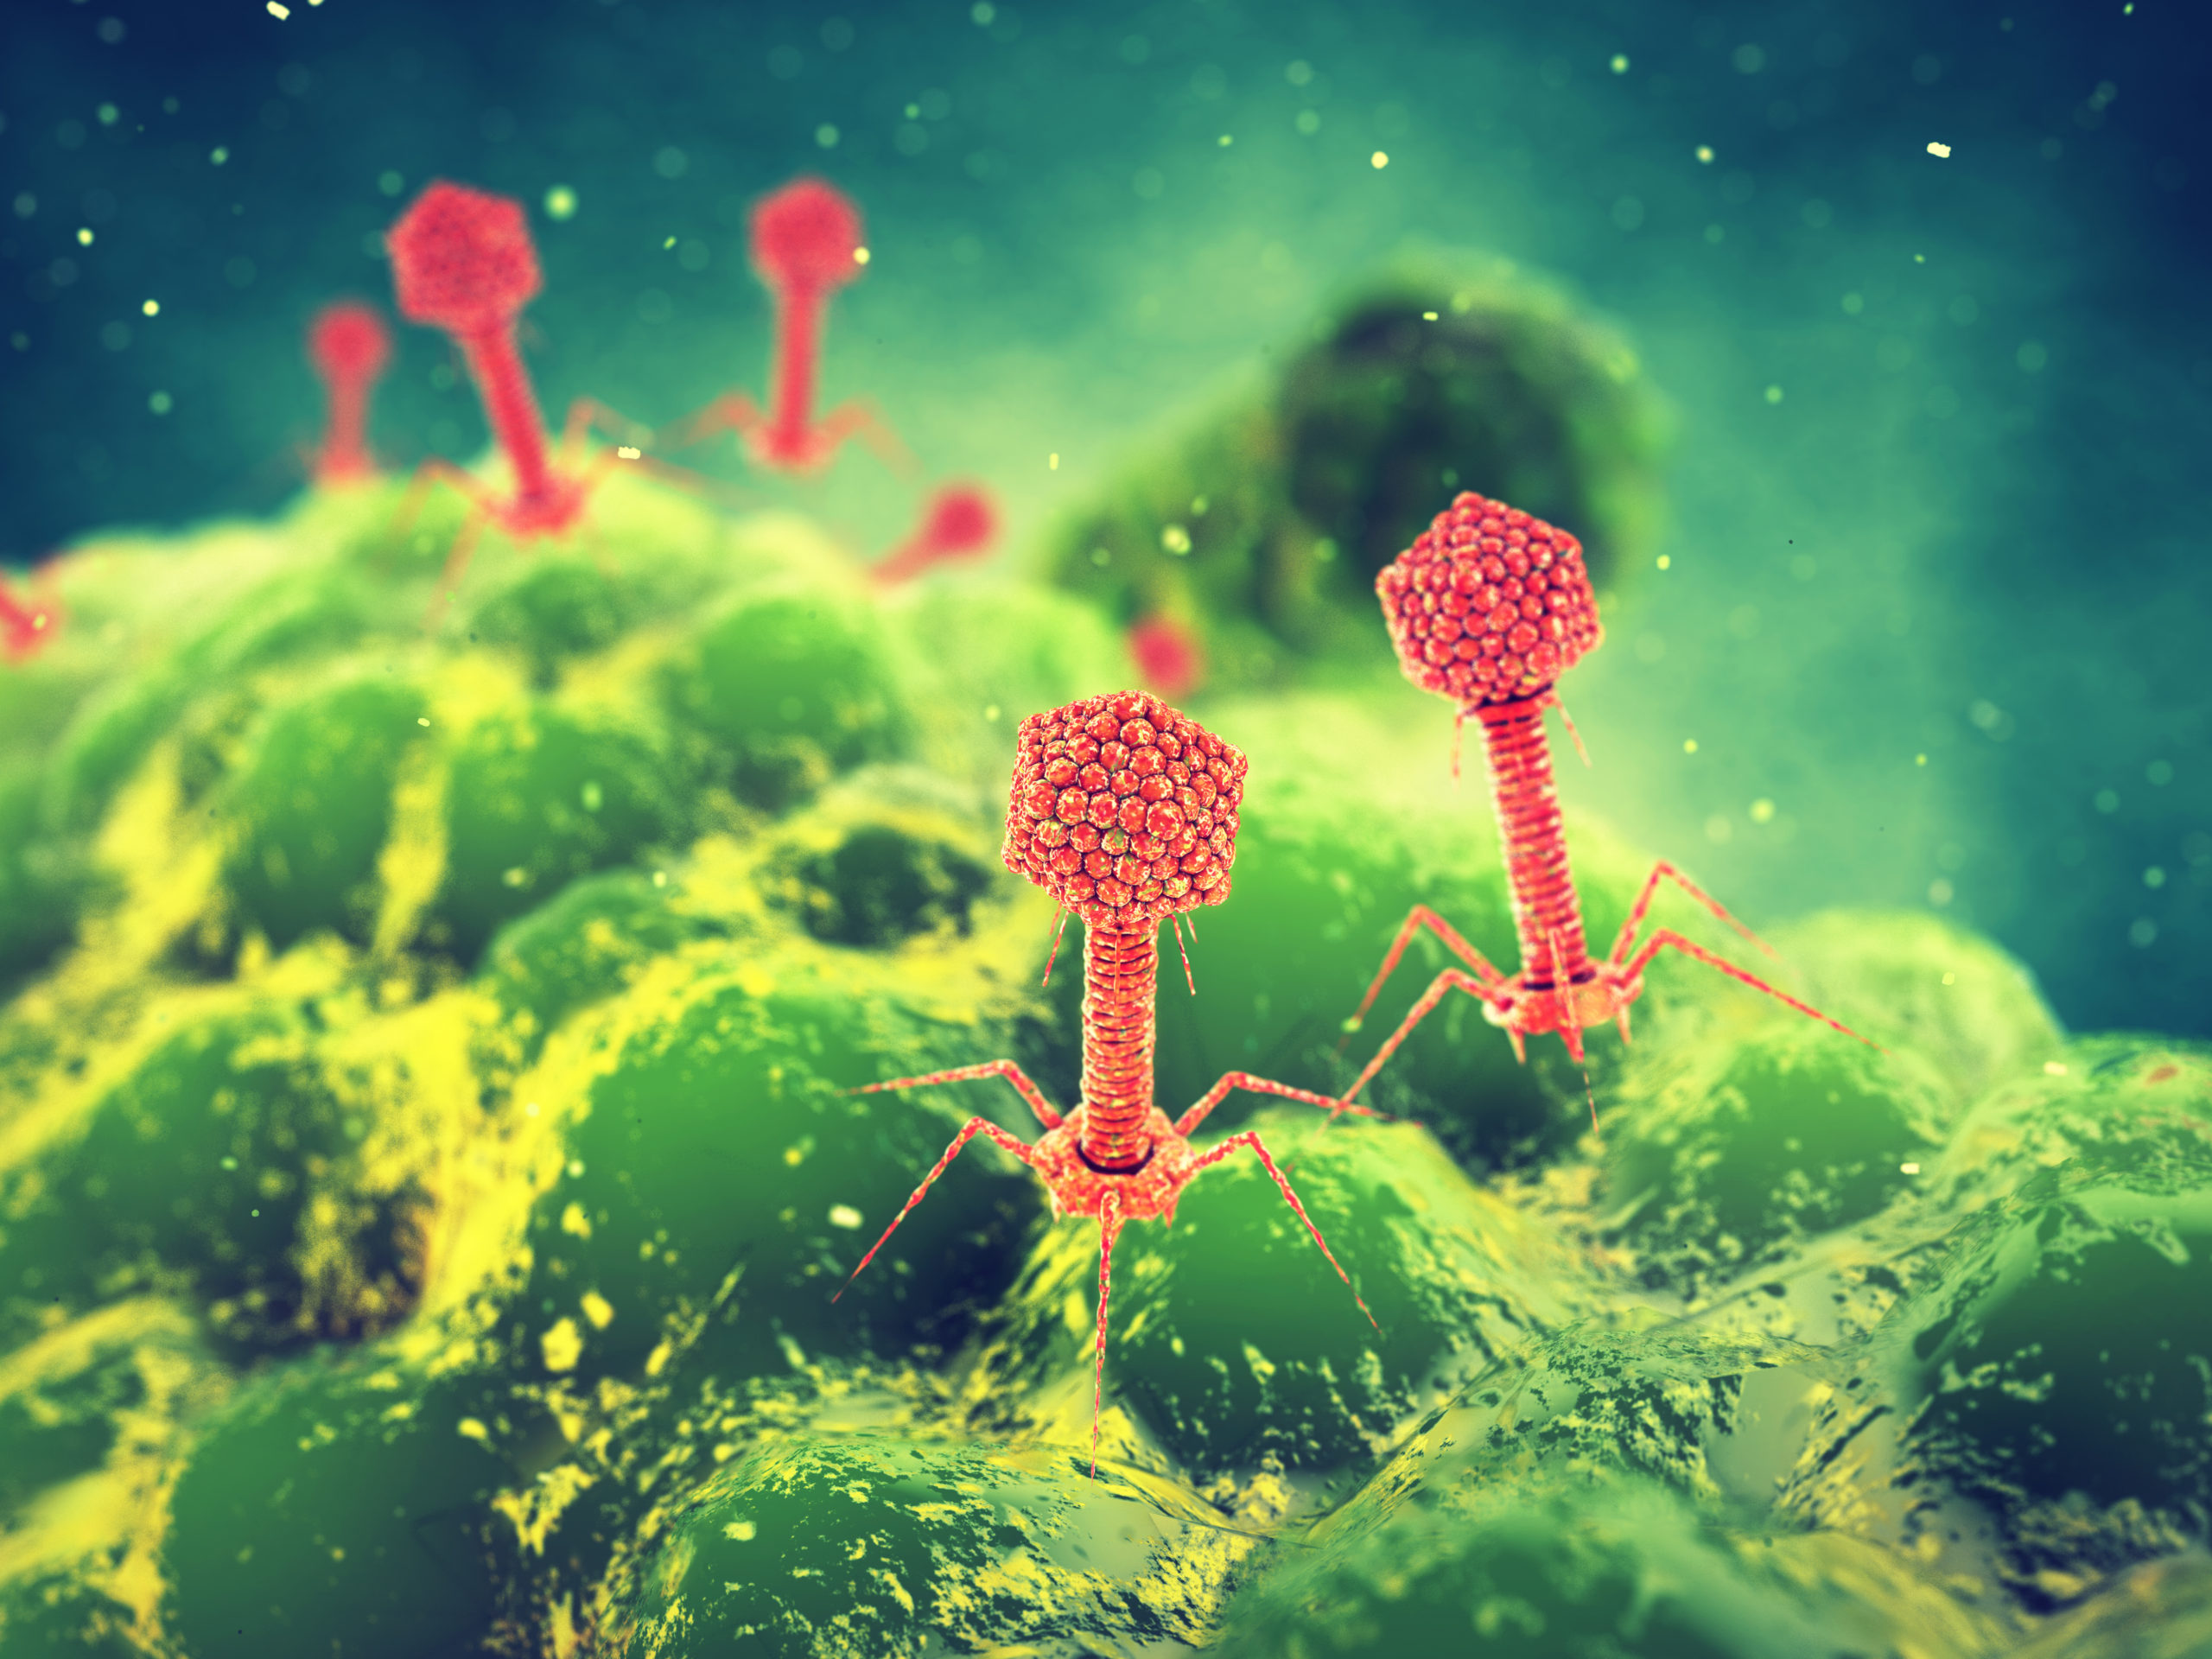 Bacteriophage Viruses Attacking Bacteria Infectious Disease 3d